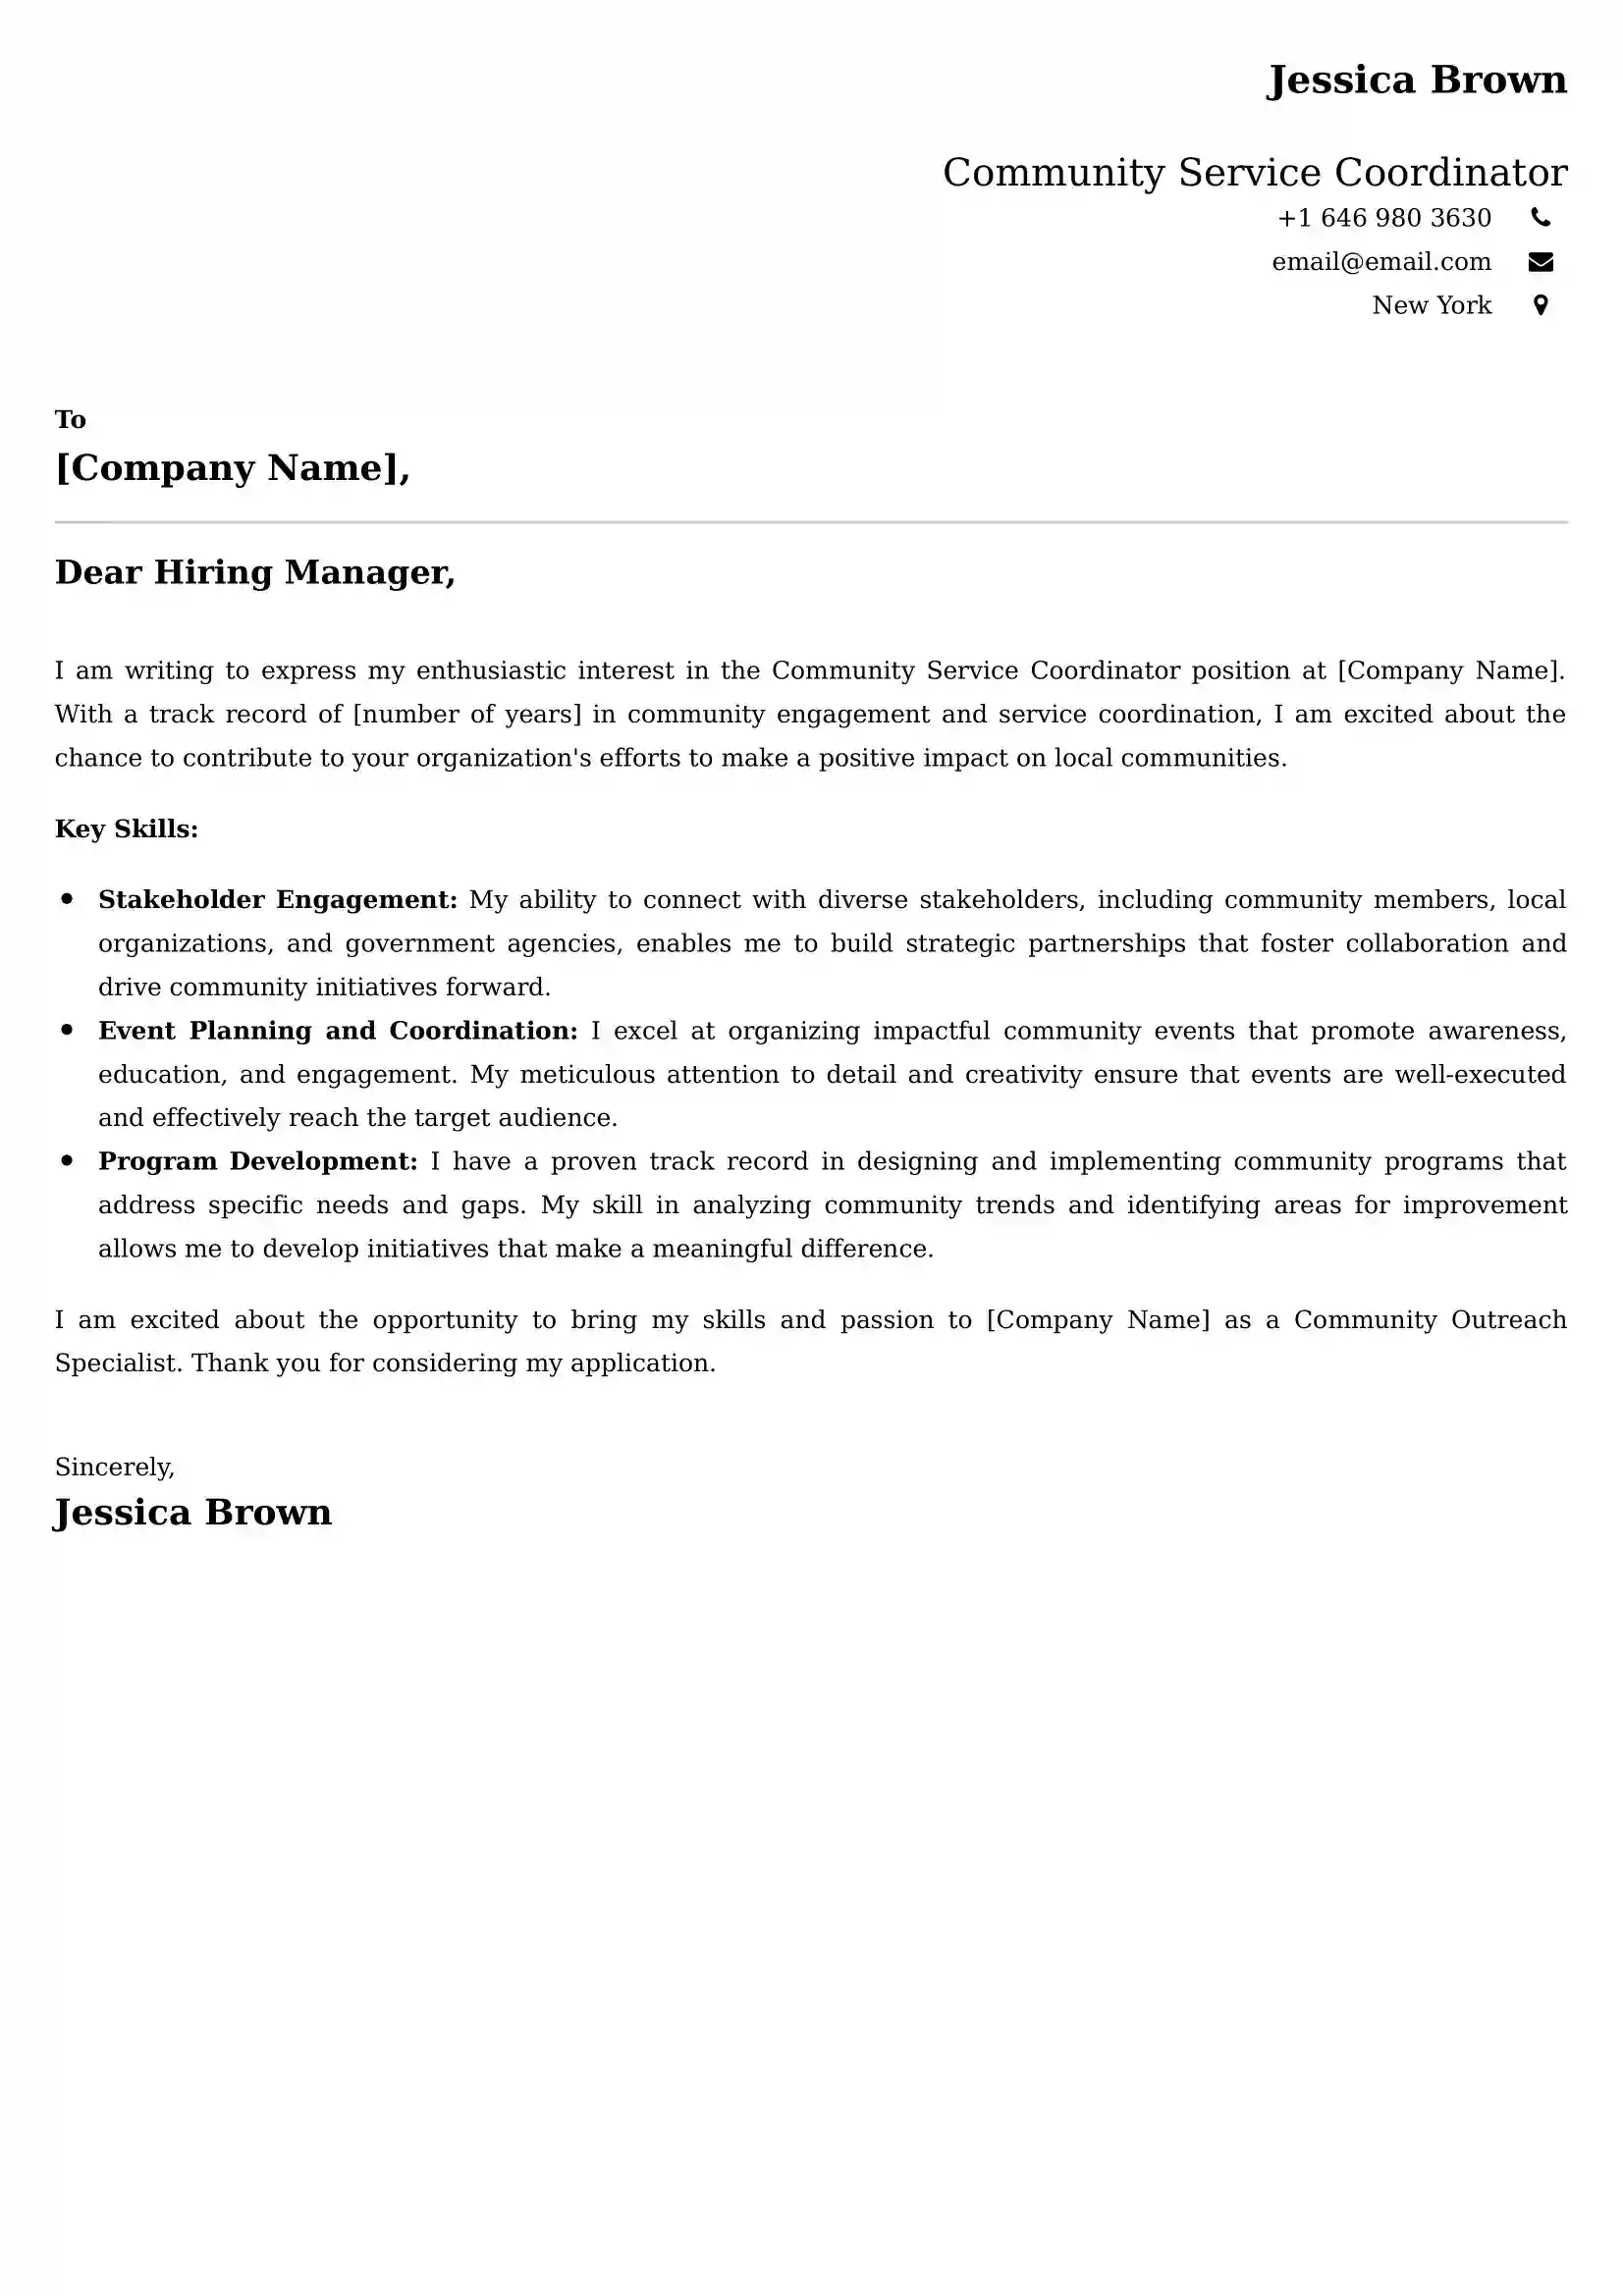 Community Service Coordinator Cover Letter Examples - Latest UK Format